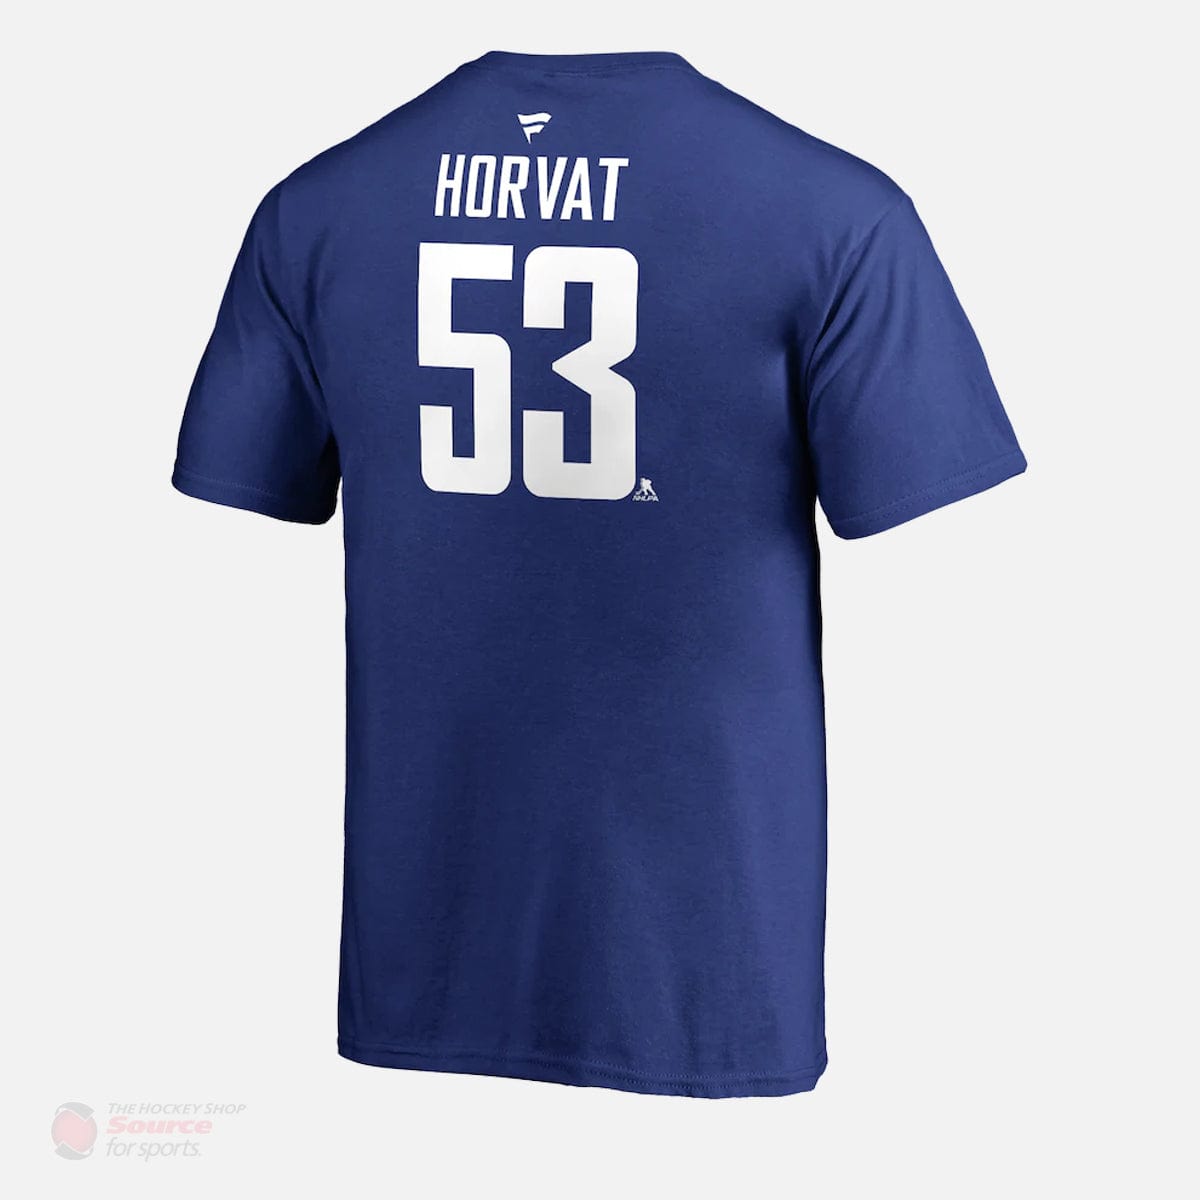 Vancouver Canucks Fanatics Authentic Name & Number Mens Shirt (2018) - Bo Horvat